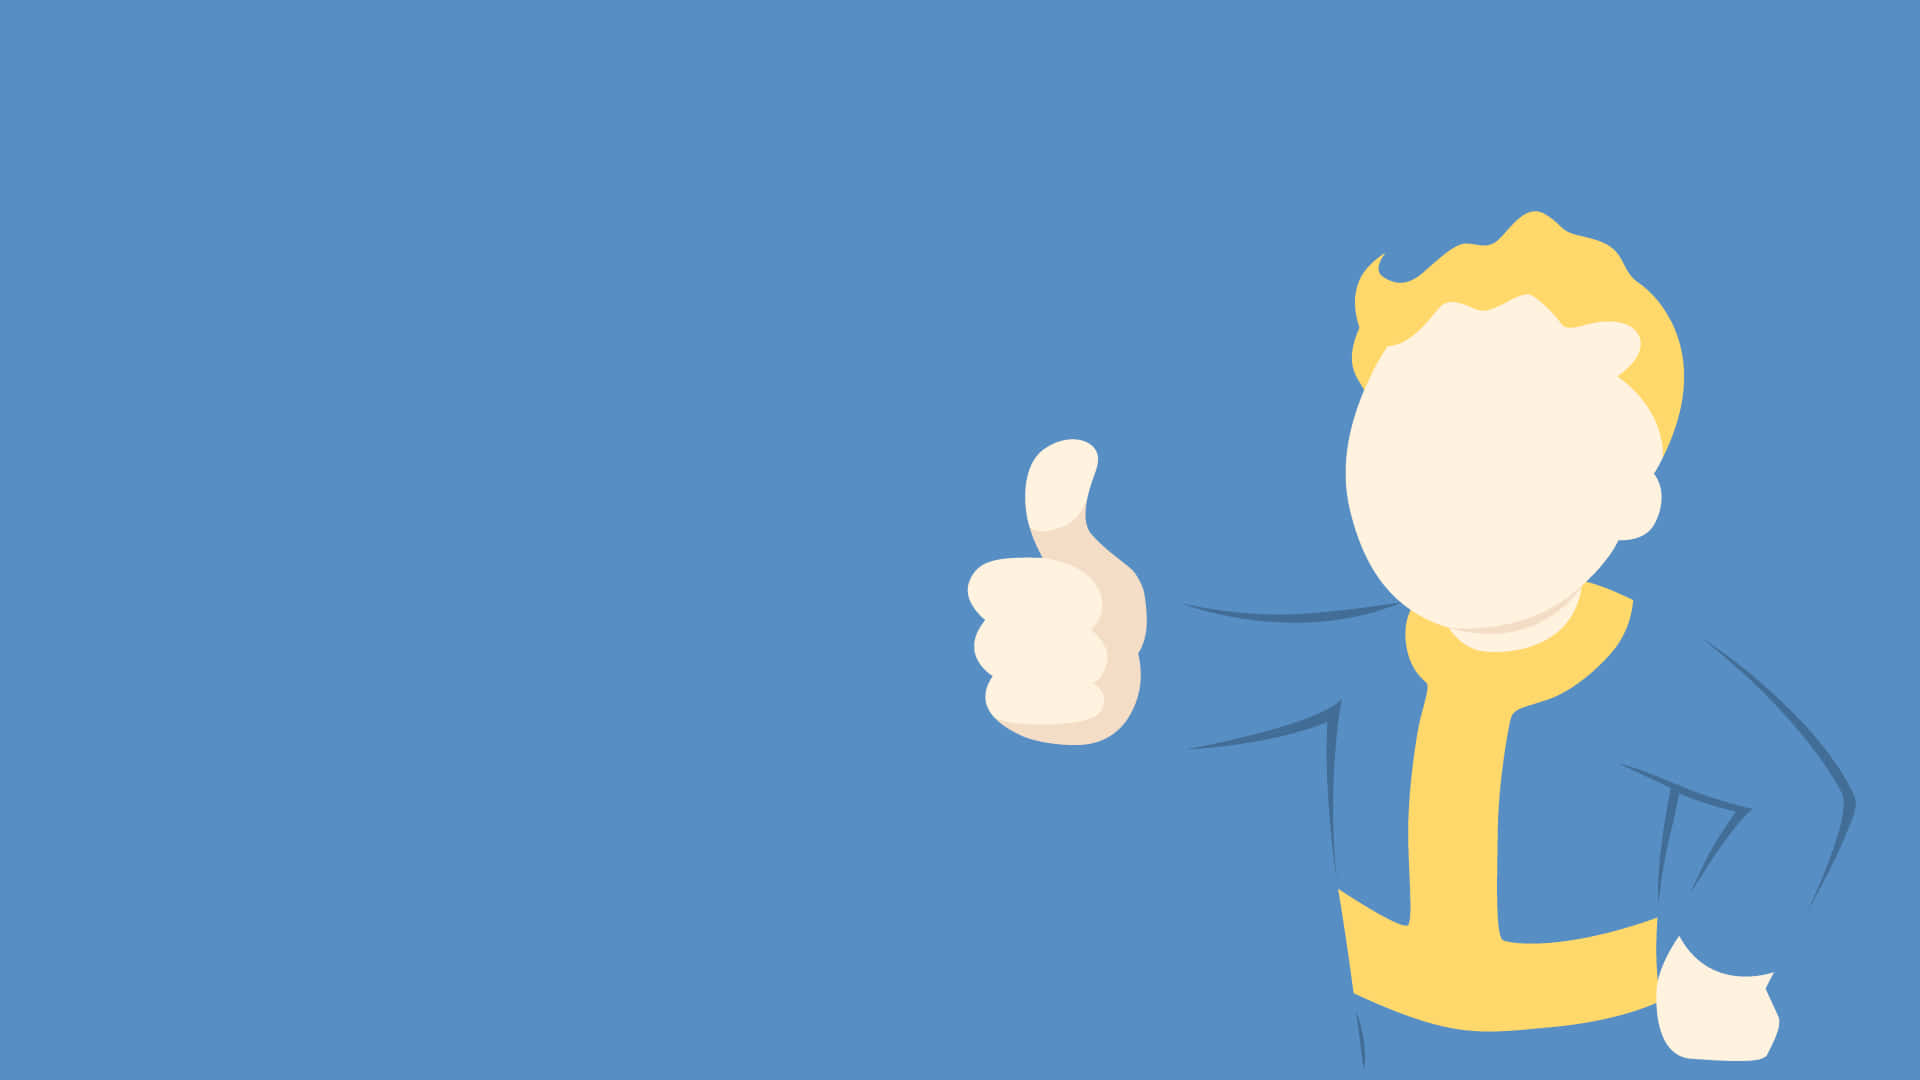 "Live with style - Vault Boy" Wallpaper